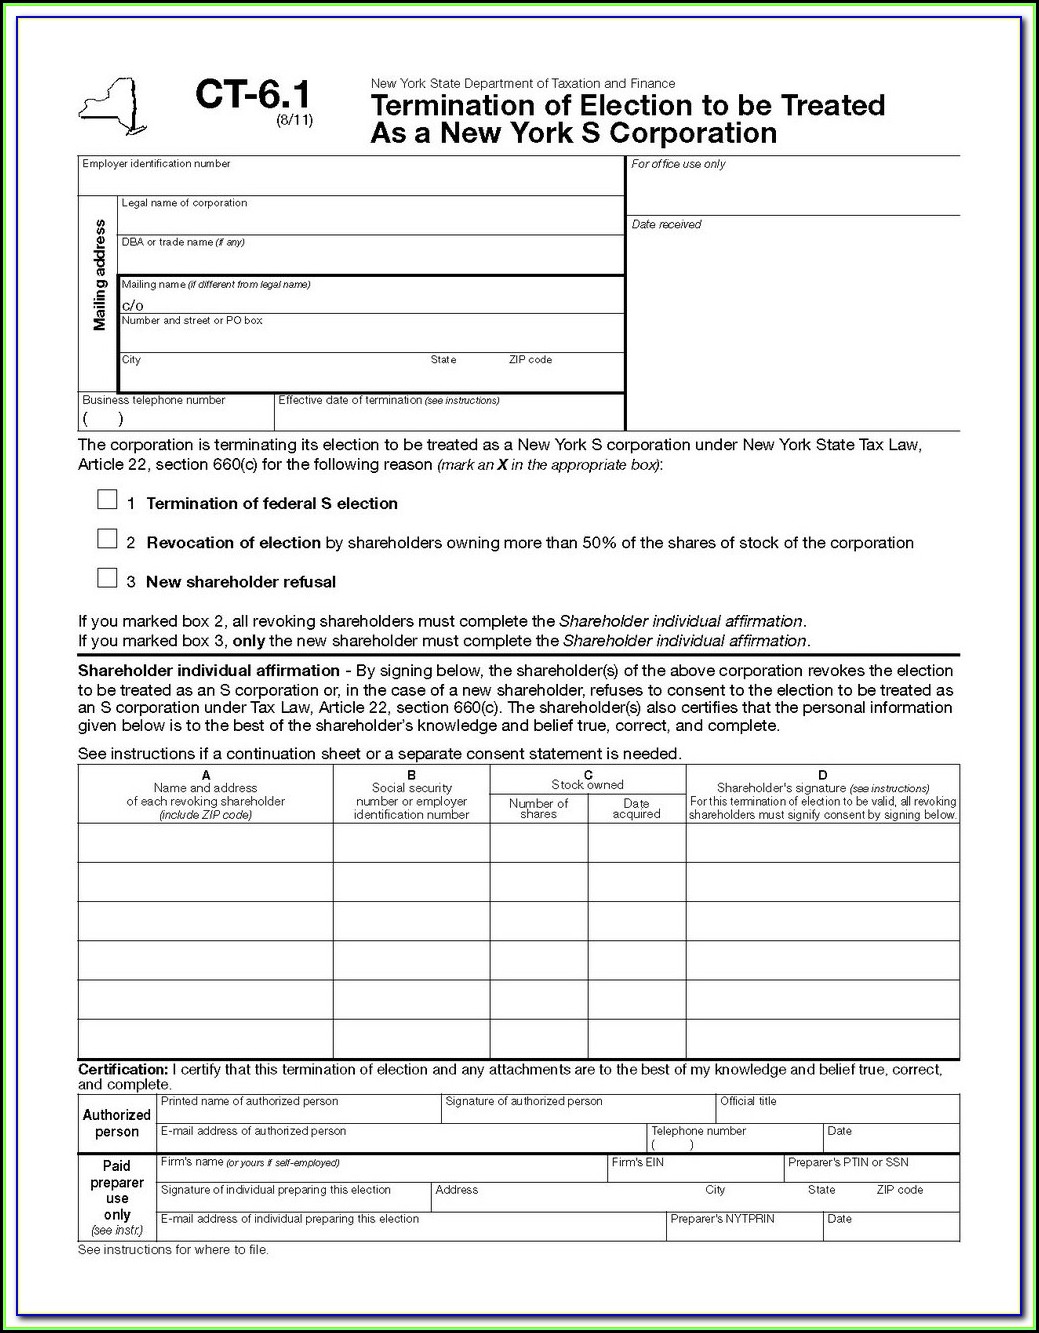 Irs Form 2290 Questions